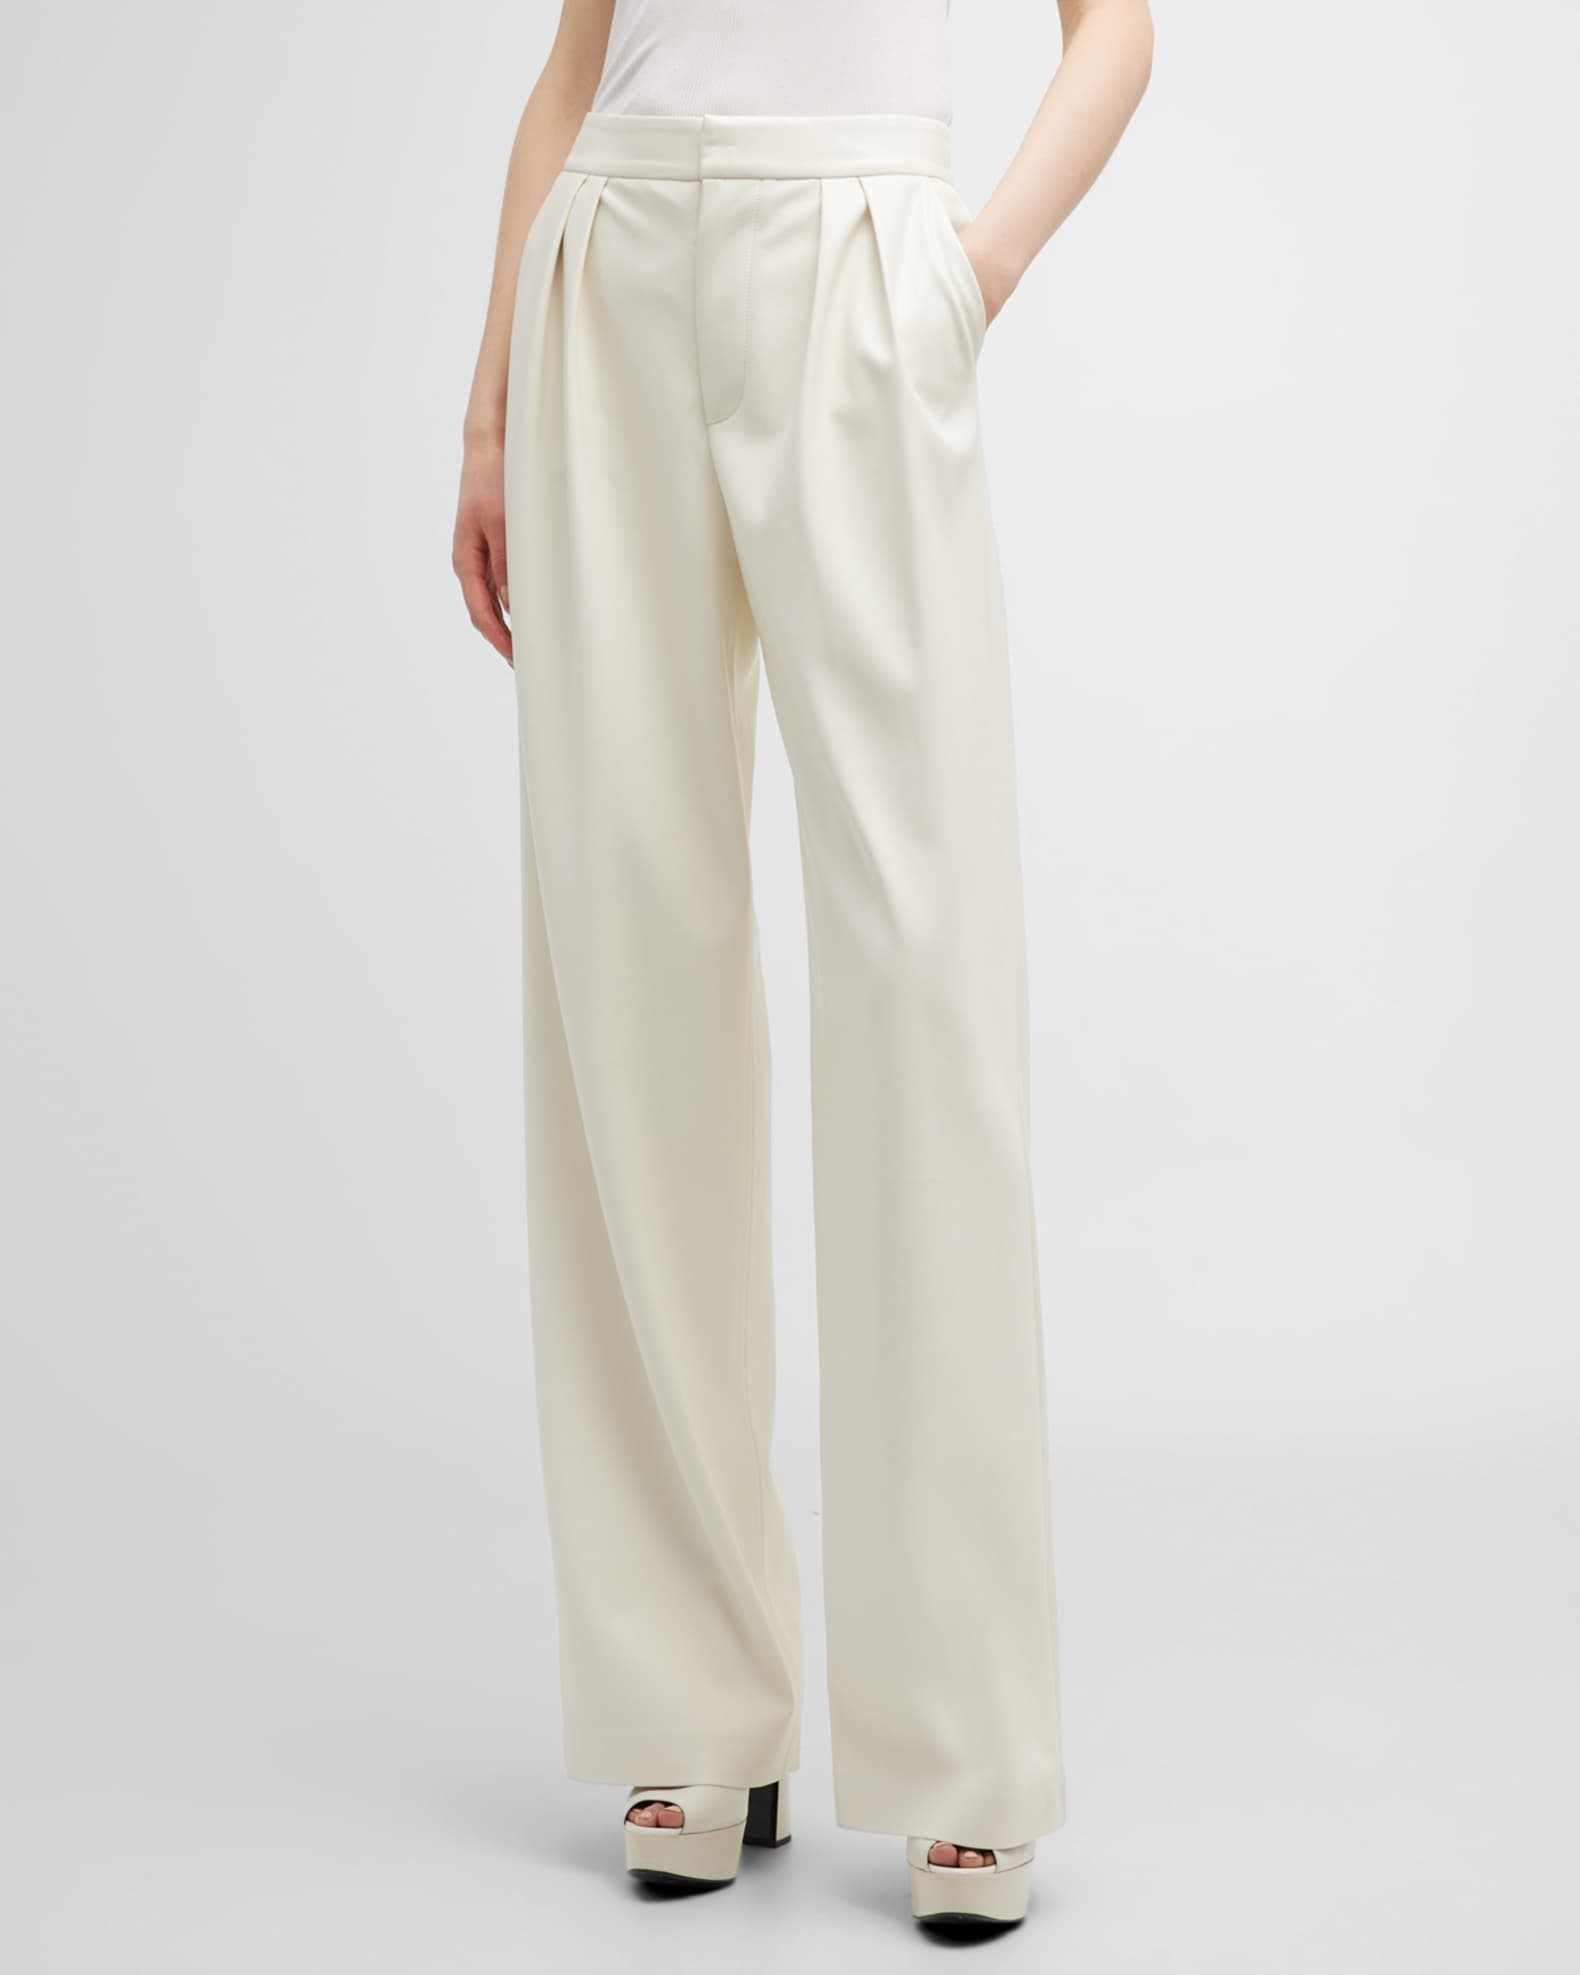 Alice + Olivia Pompey Vegan Leather High-Waist Pleated Trousers ...